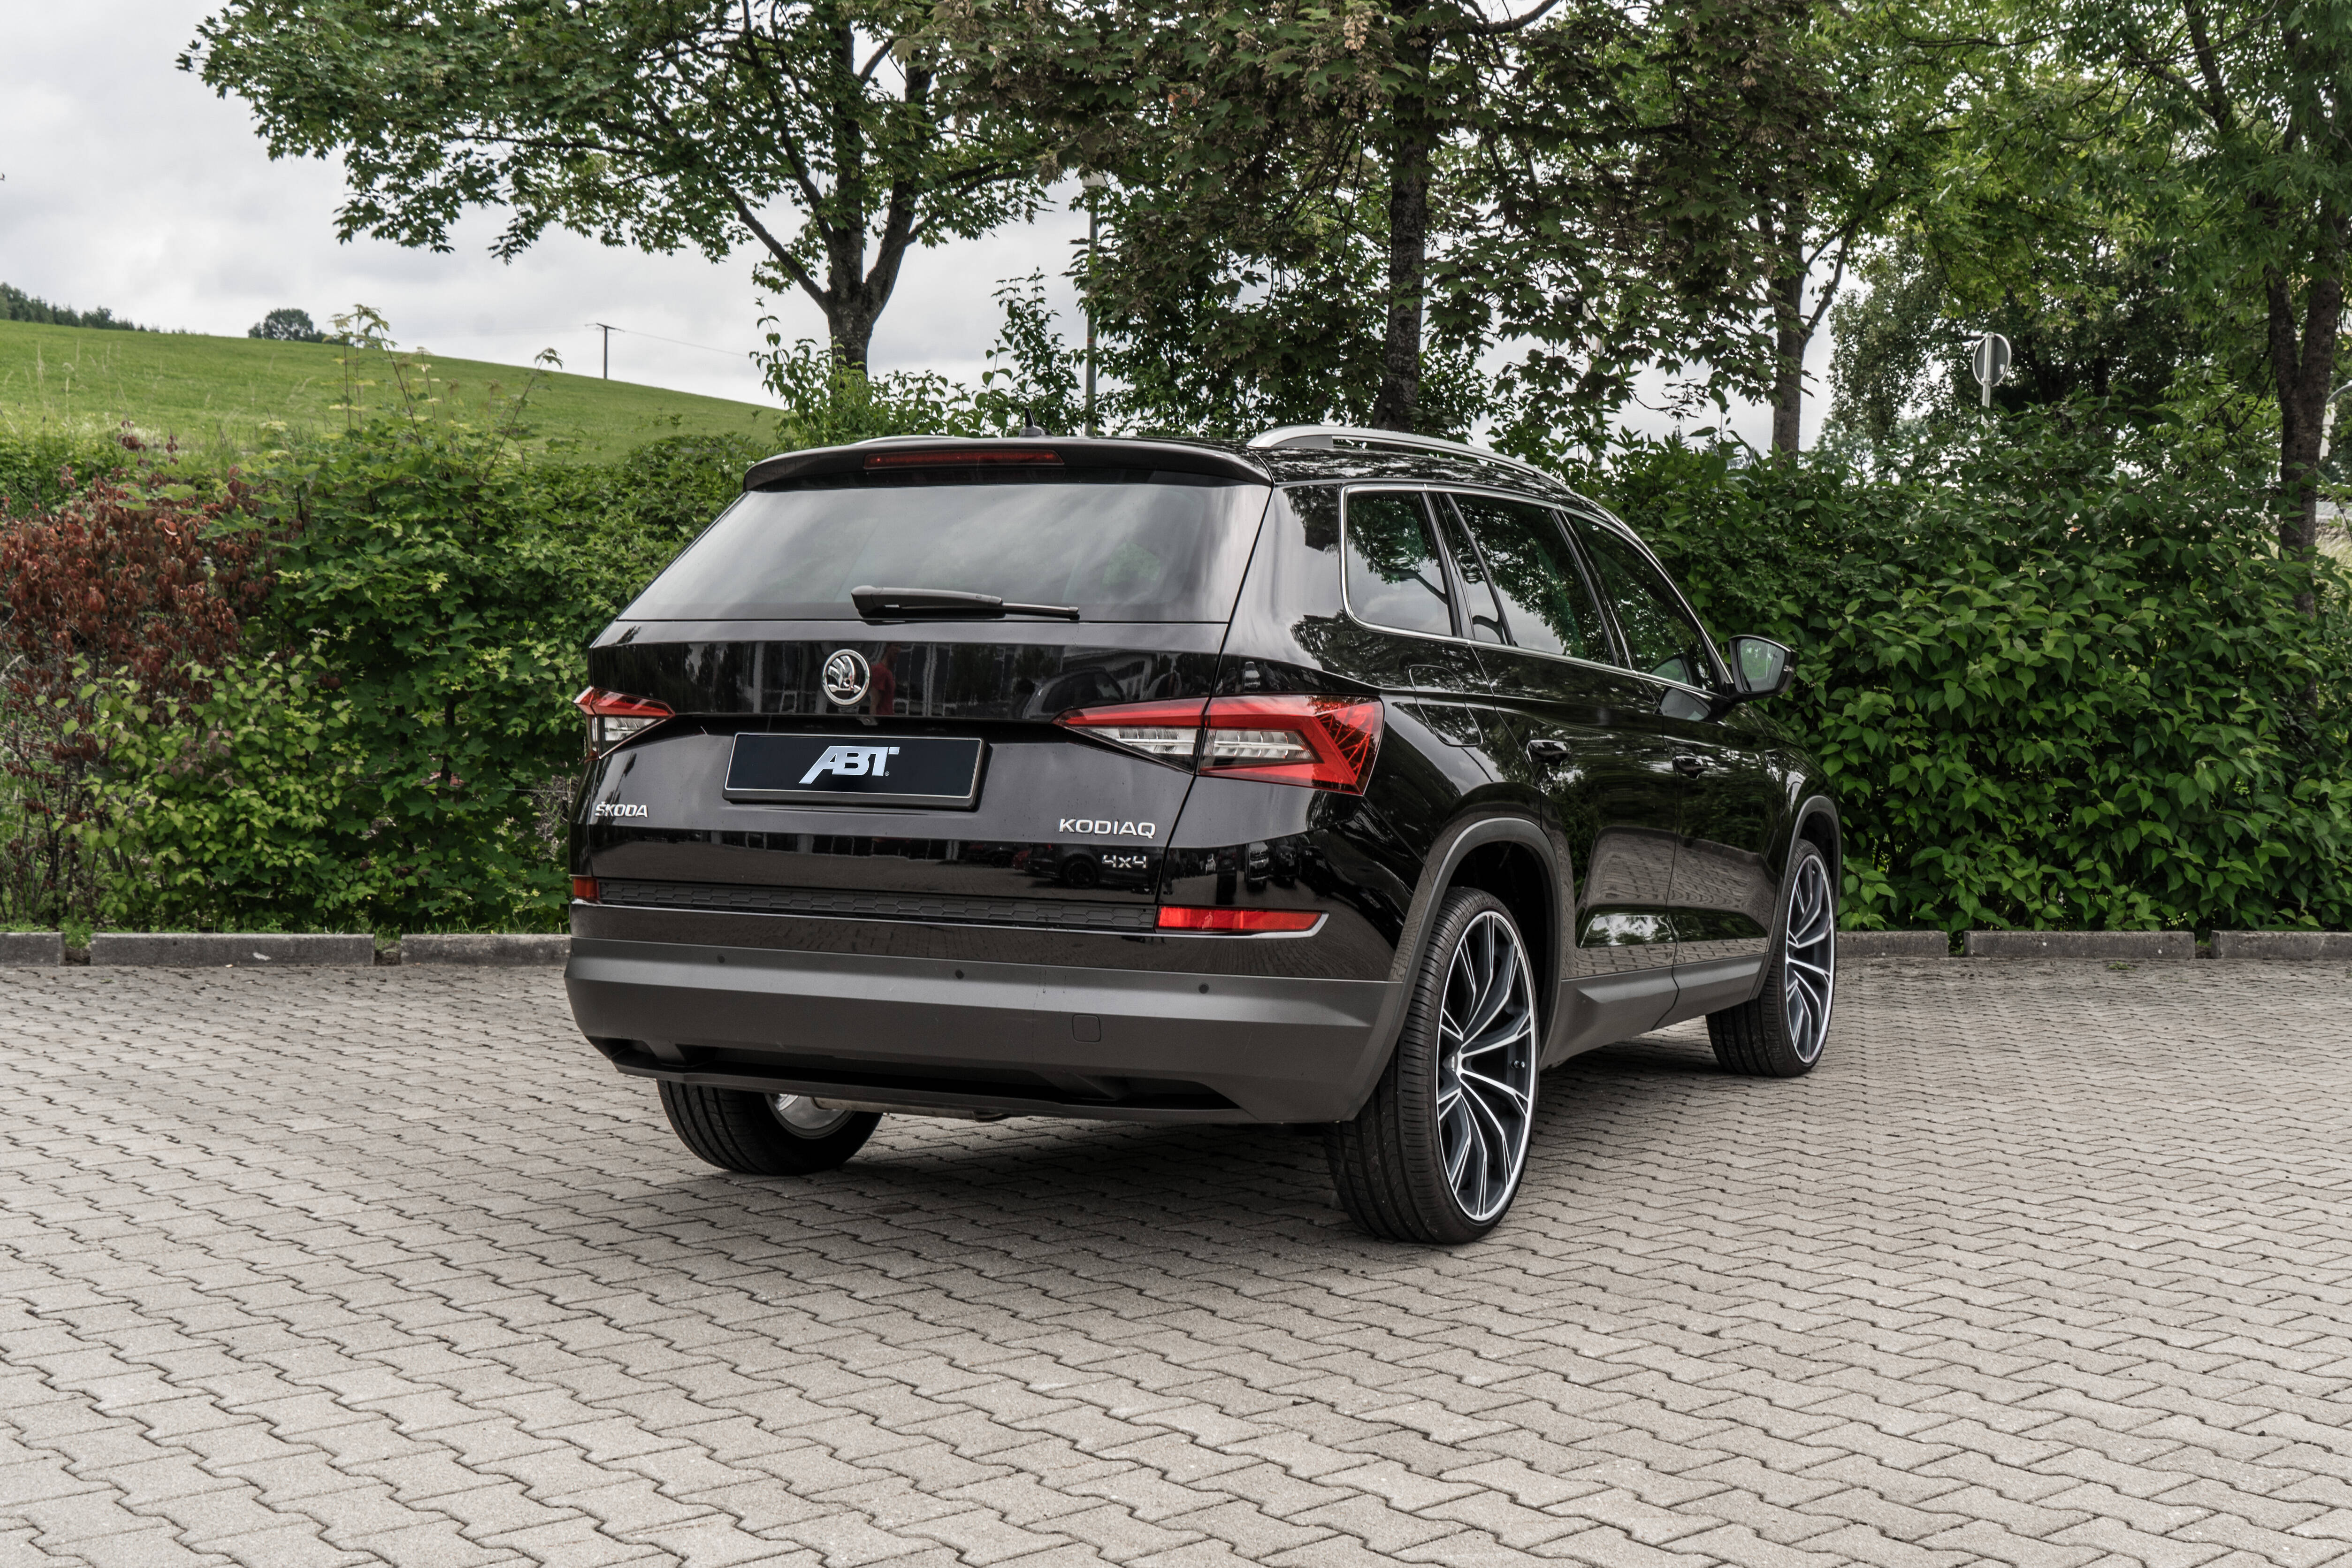 Strong like a bear: ABT generates up to 216 HP or 440 Nm in the Skoda Kodiaq  - Audi Tuning, VW Tuning, Chiptuning von ABT Sportsline.